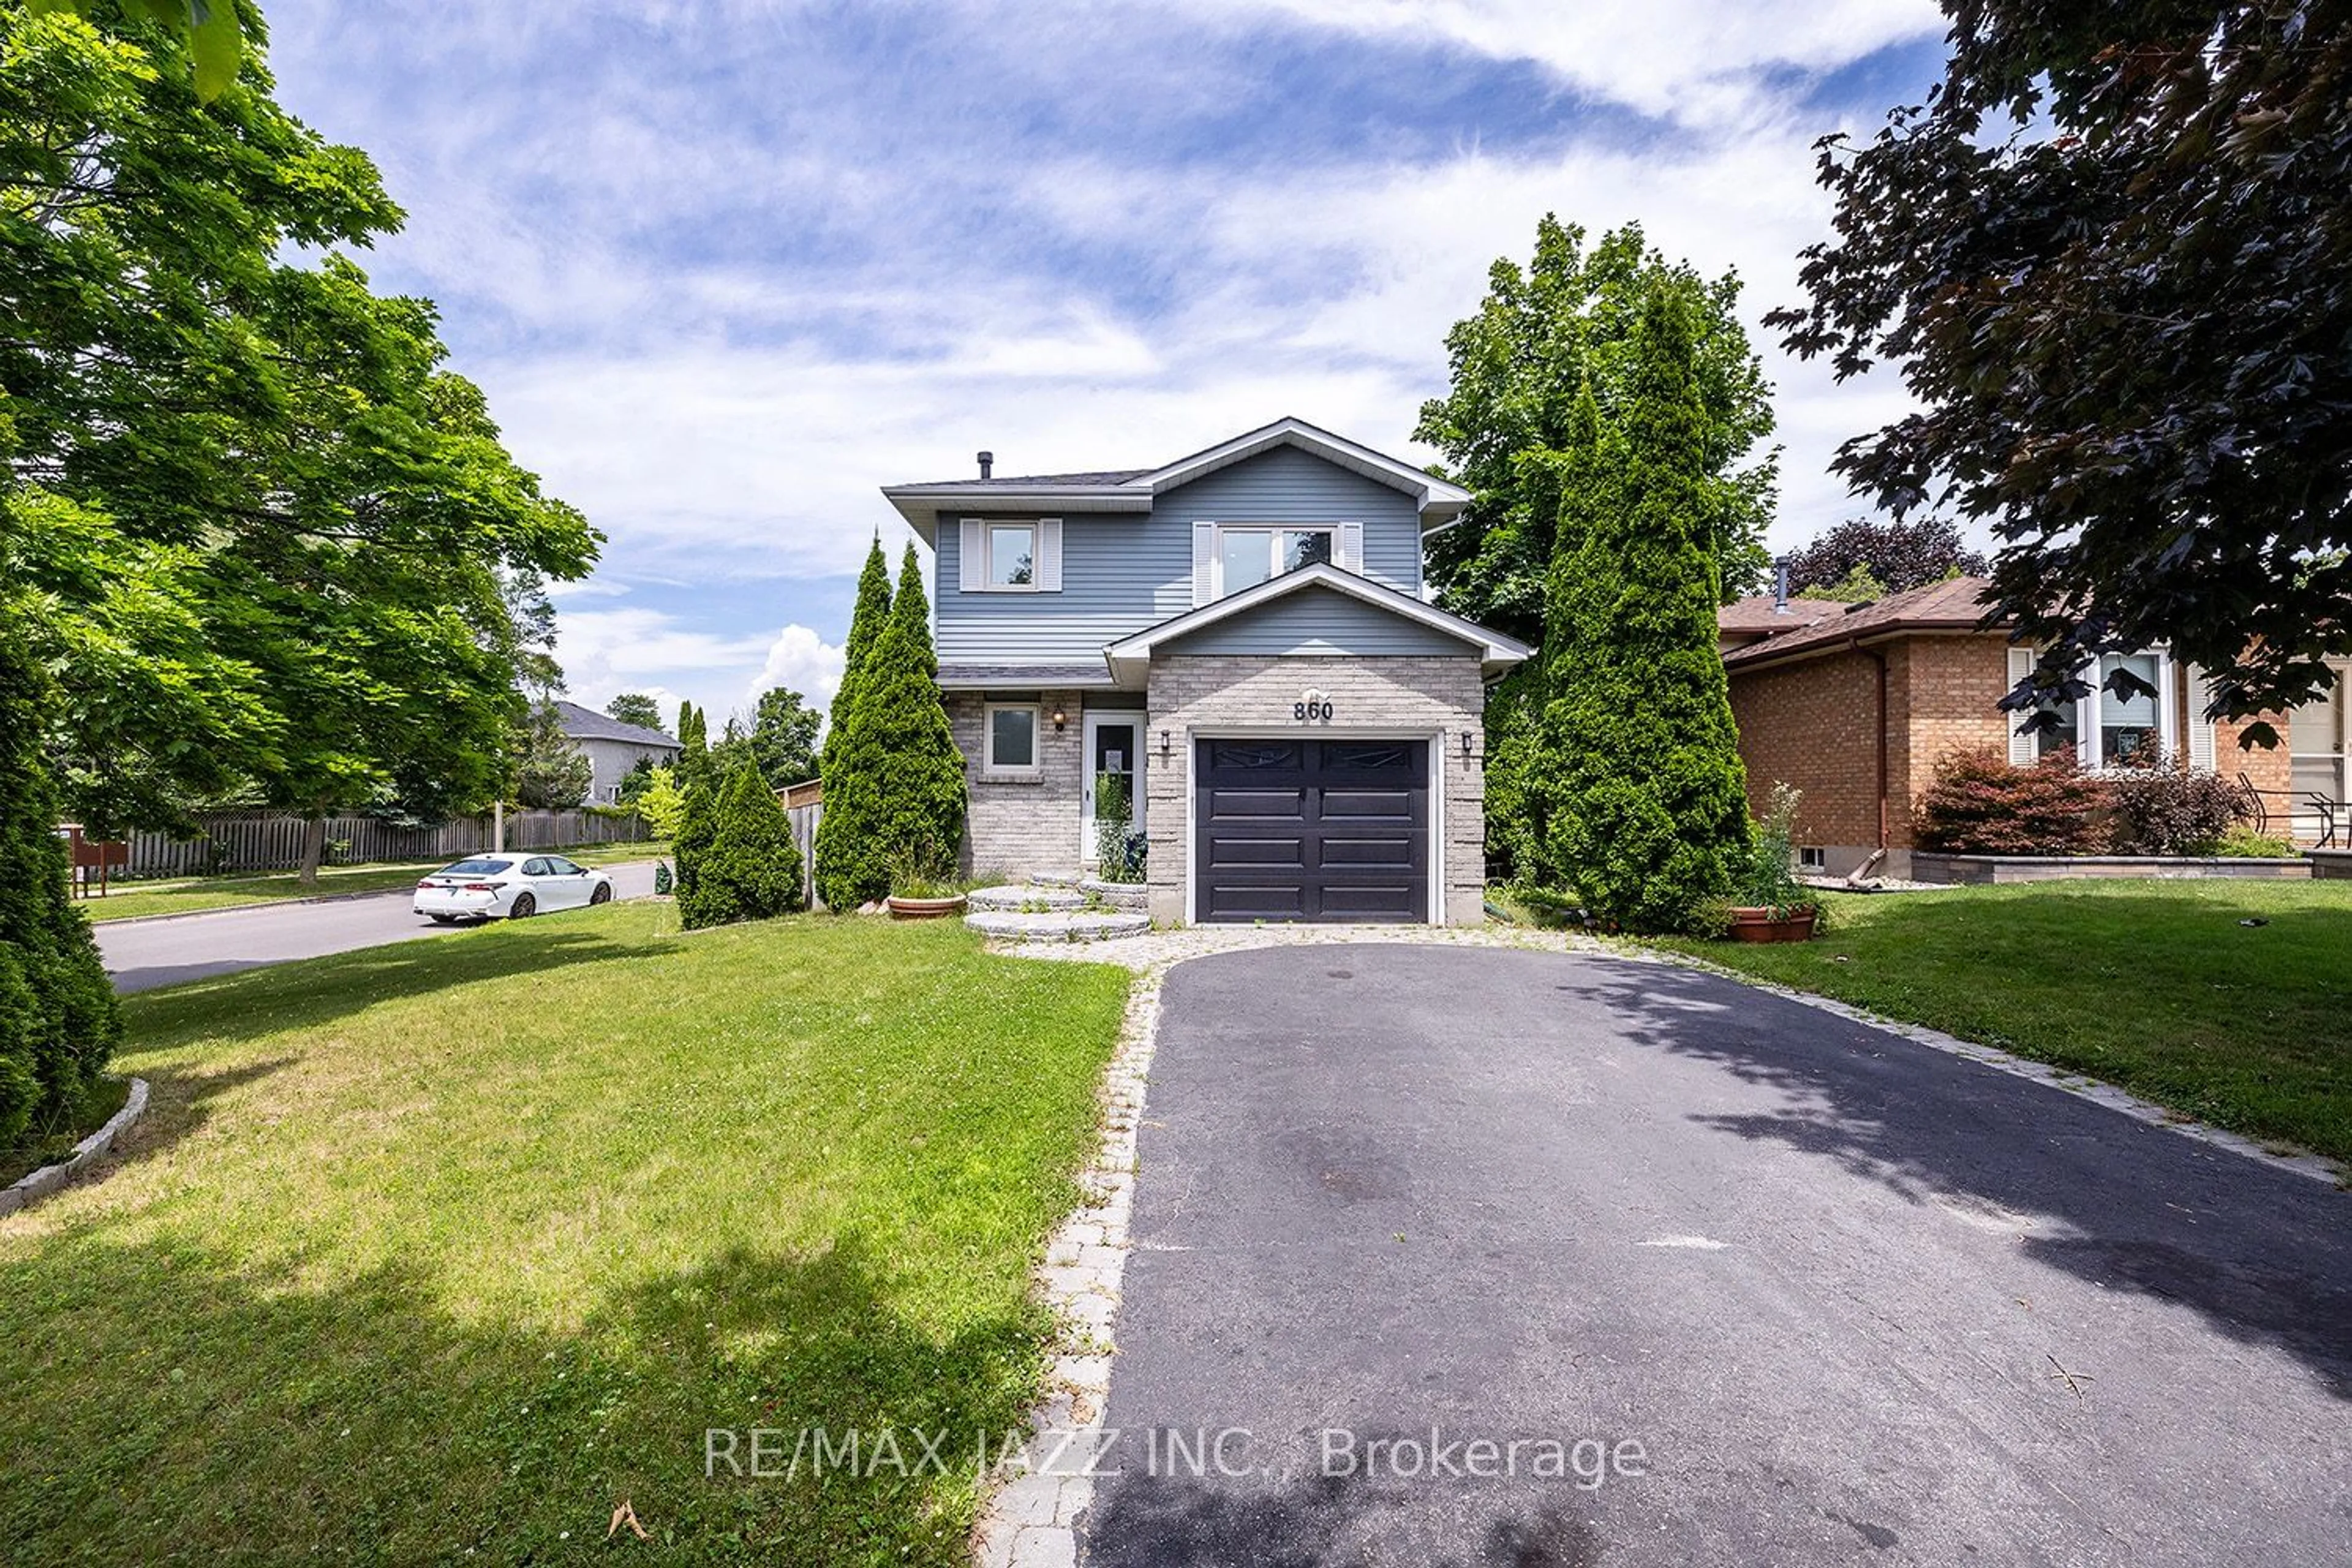 Frontside or backside of a home for 860 Cartref Ave, Oshawa Ontario L1J 7M6